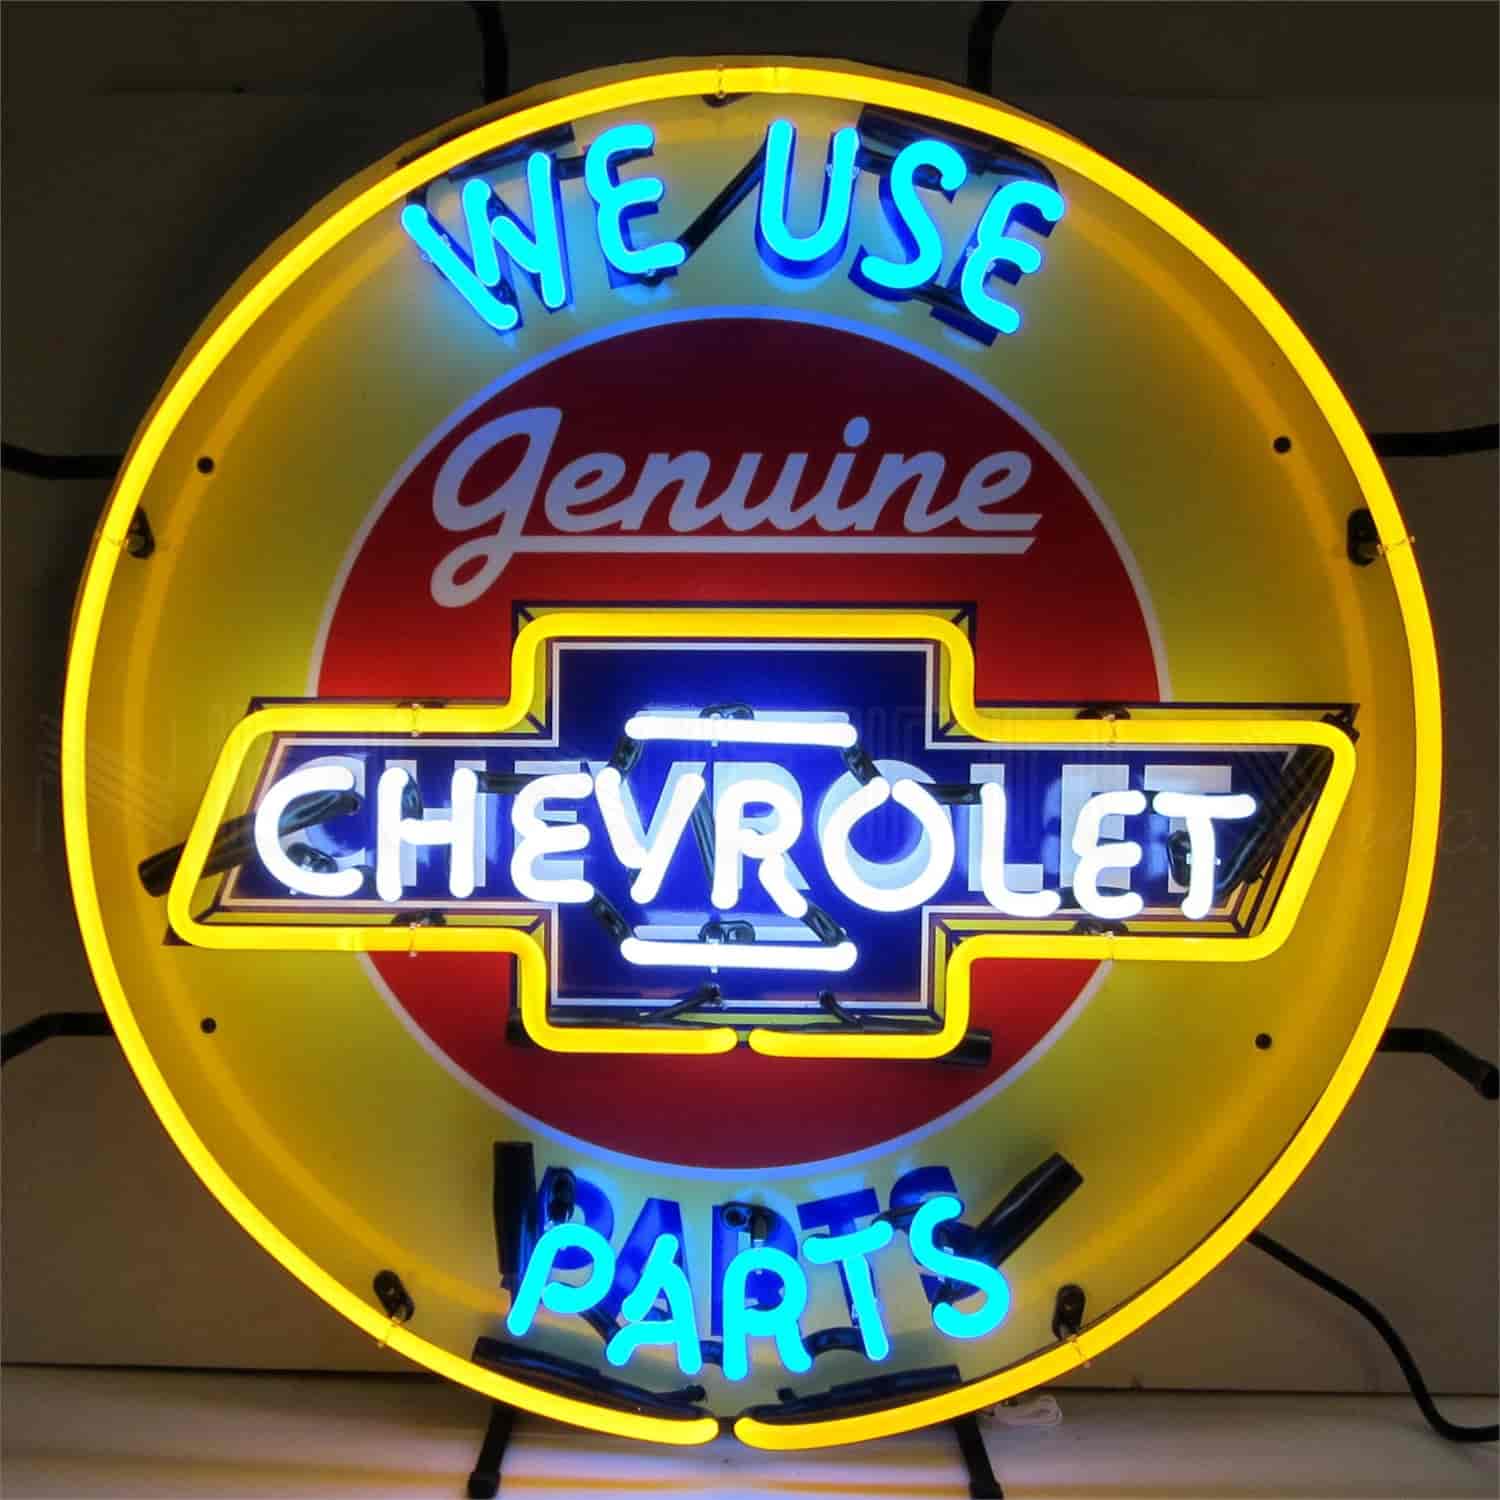 We Use Genuine Chevrolet Parts Neon Sign With